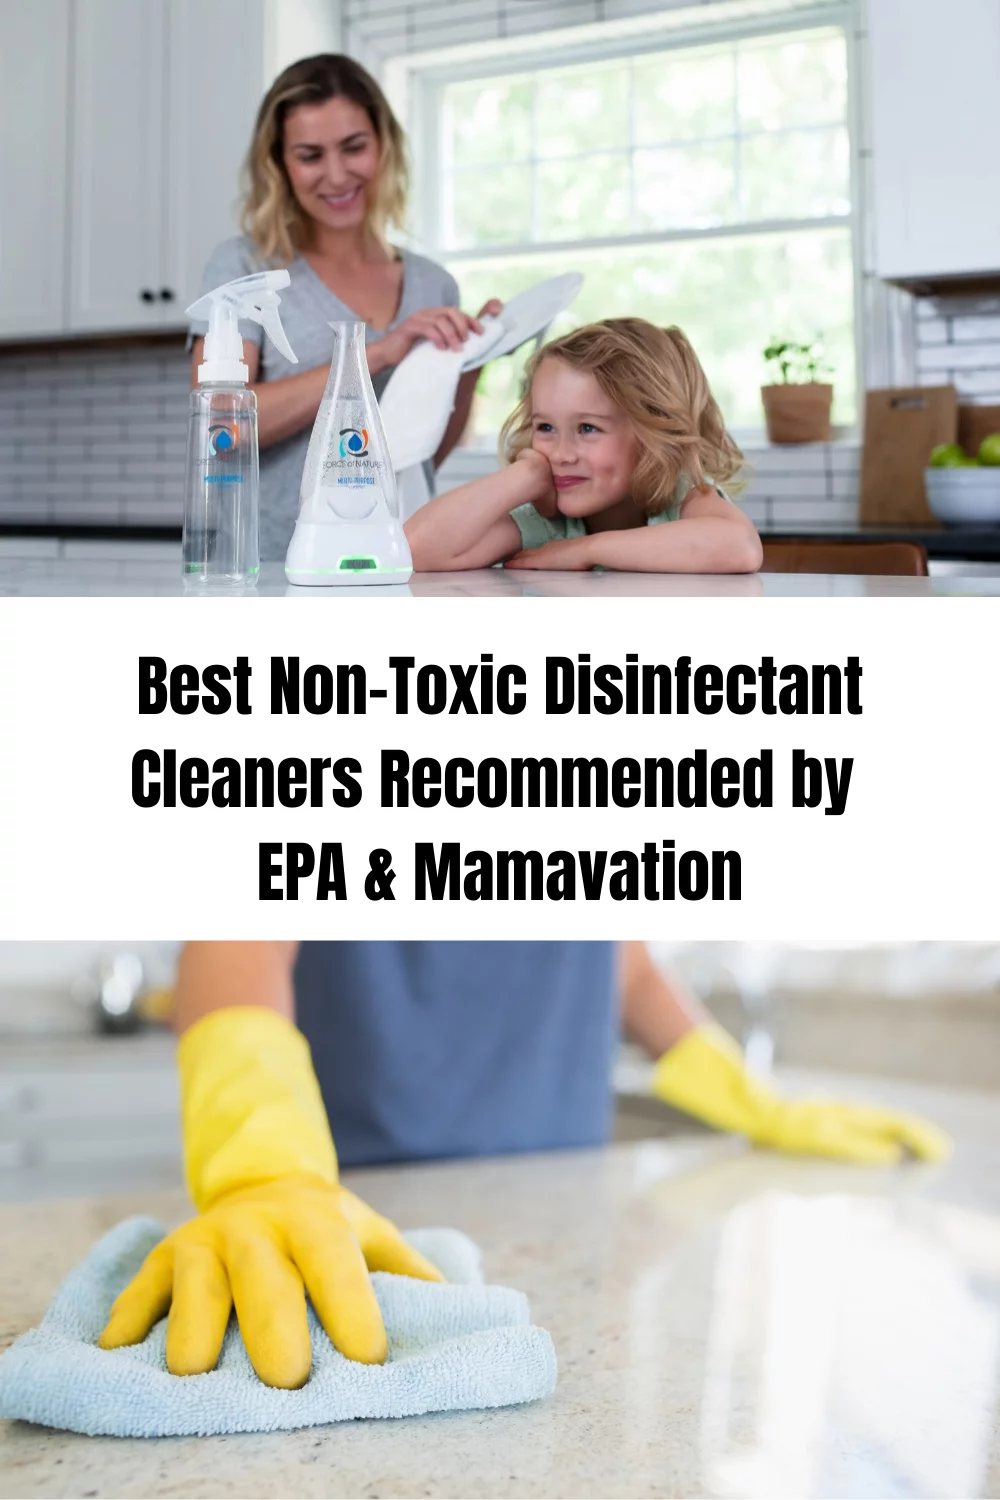 Best Non-toxic Disinfectants Recommended by EPA and Mamavation